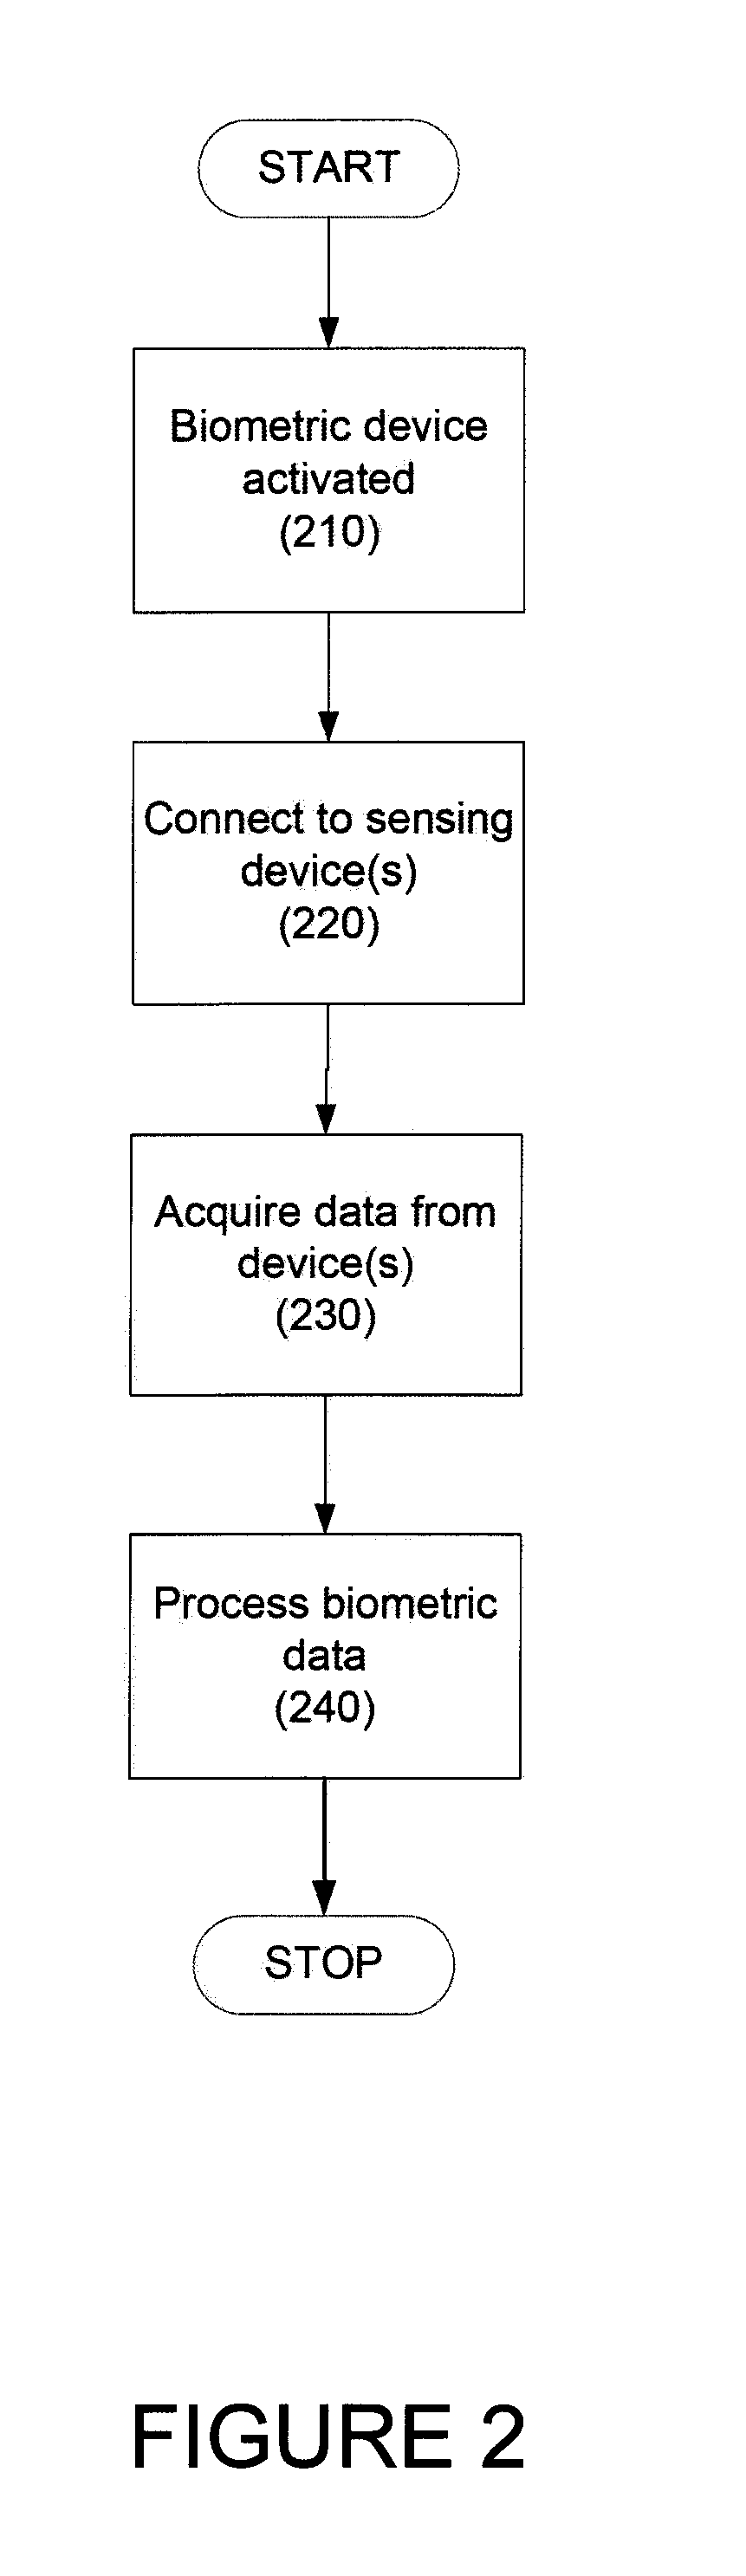 Biometrics identification module and personal wearable electronics network based authentication and transaction processing